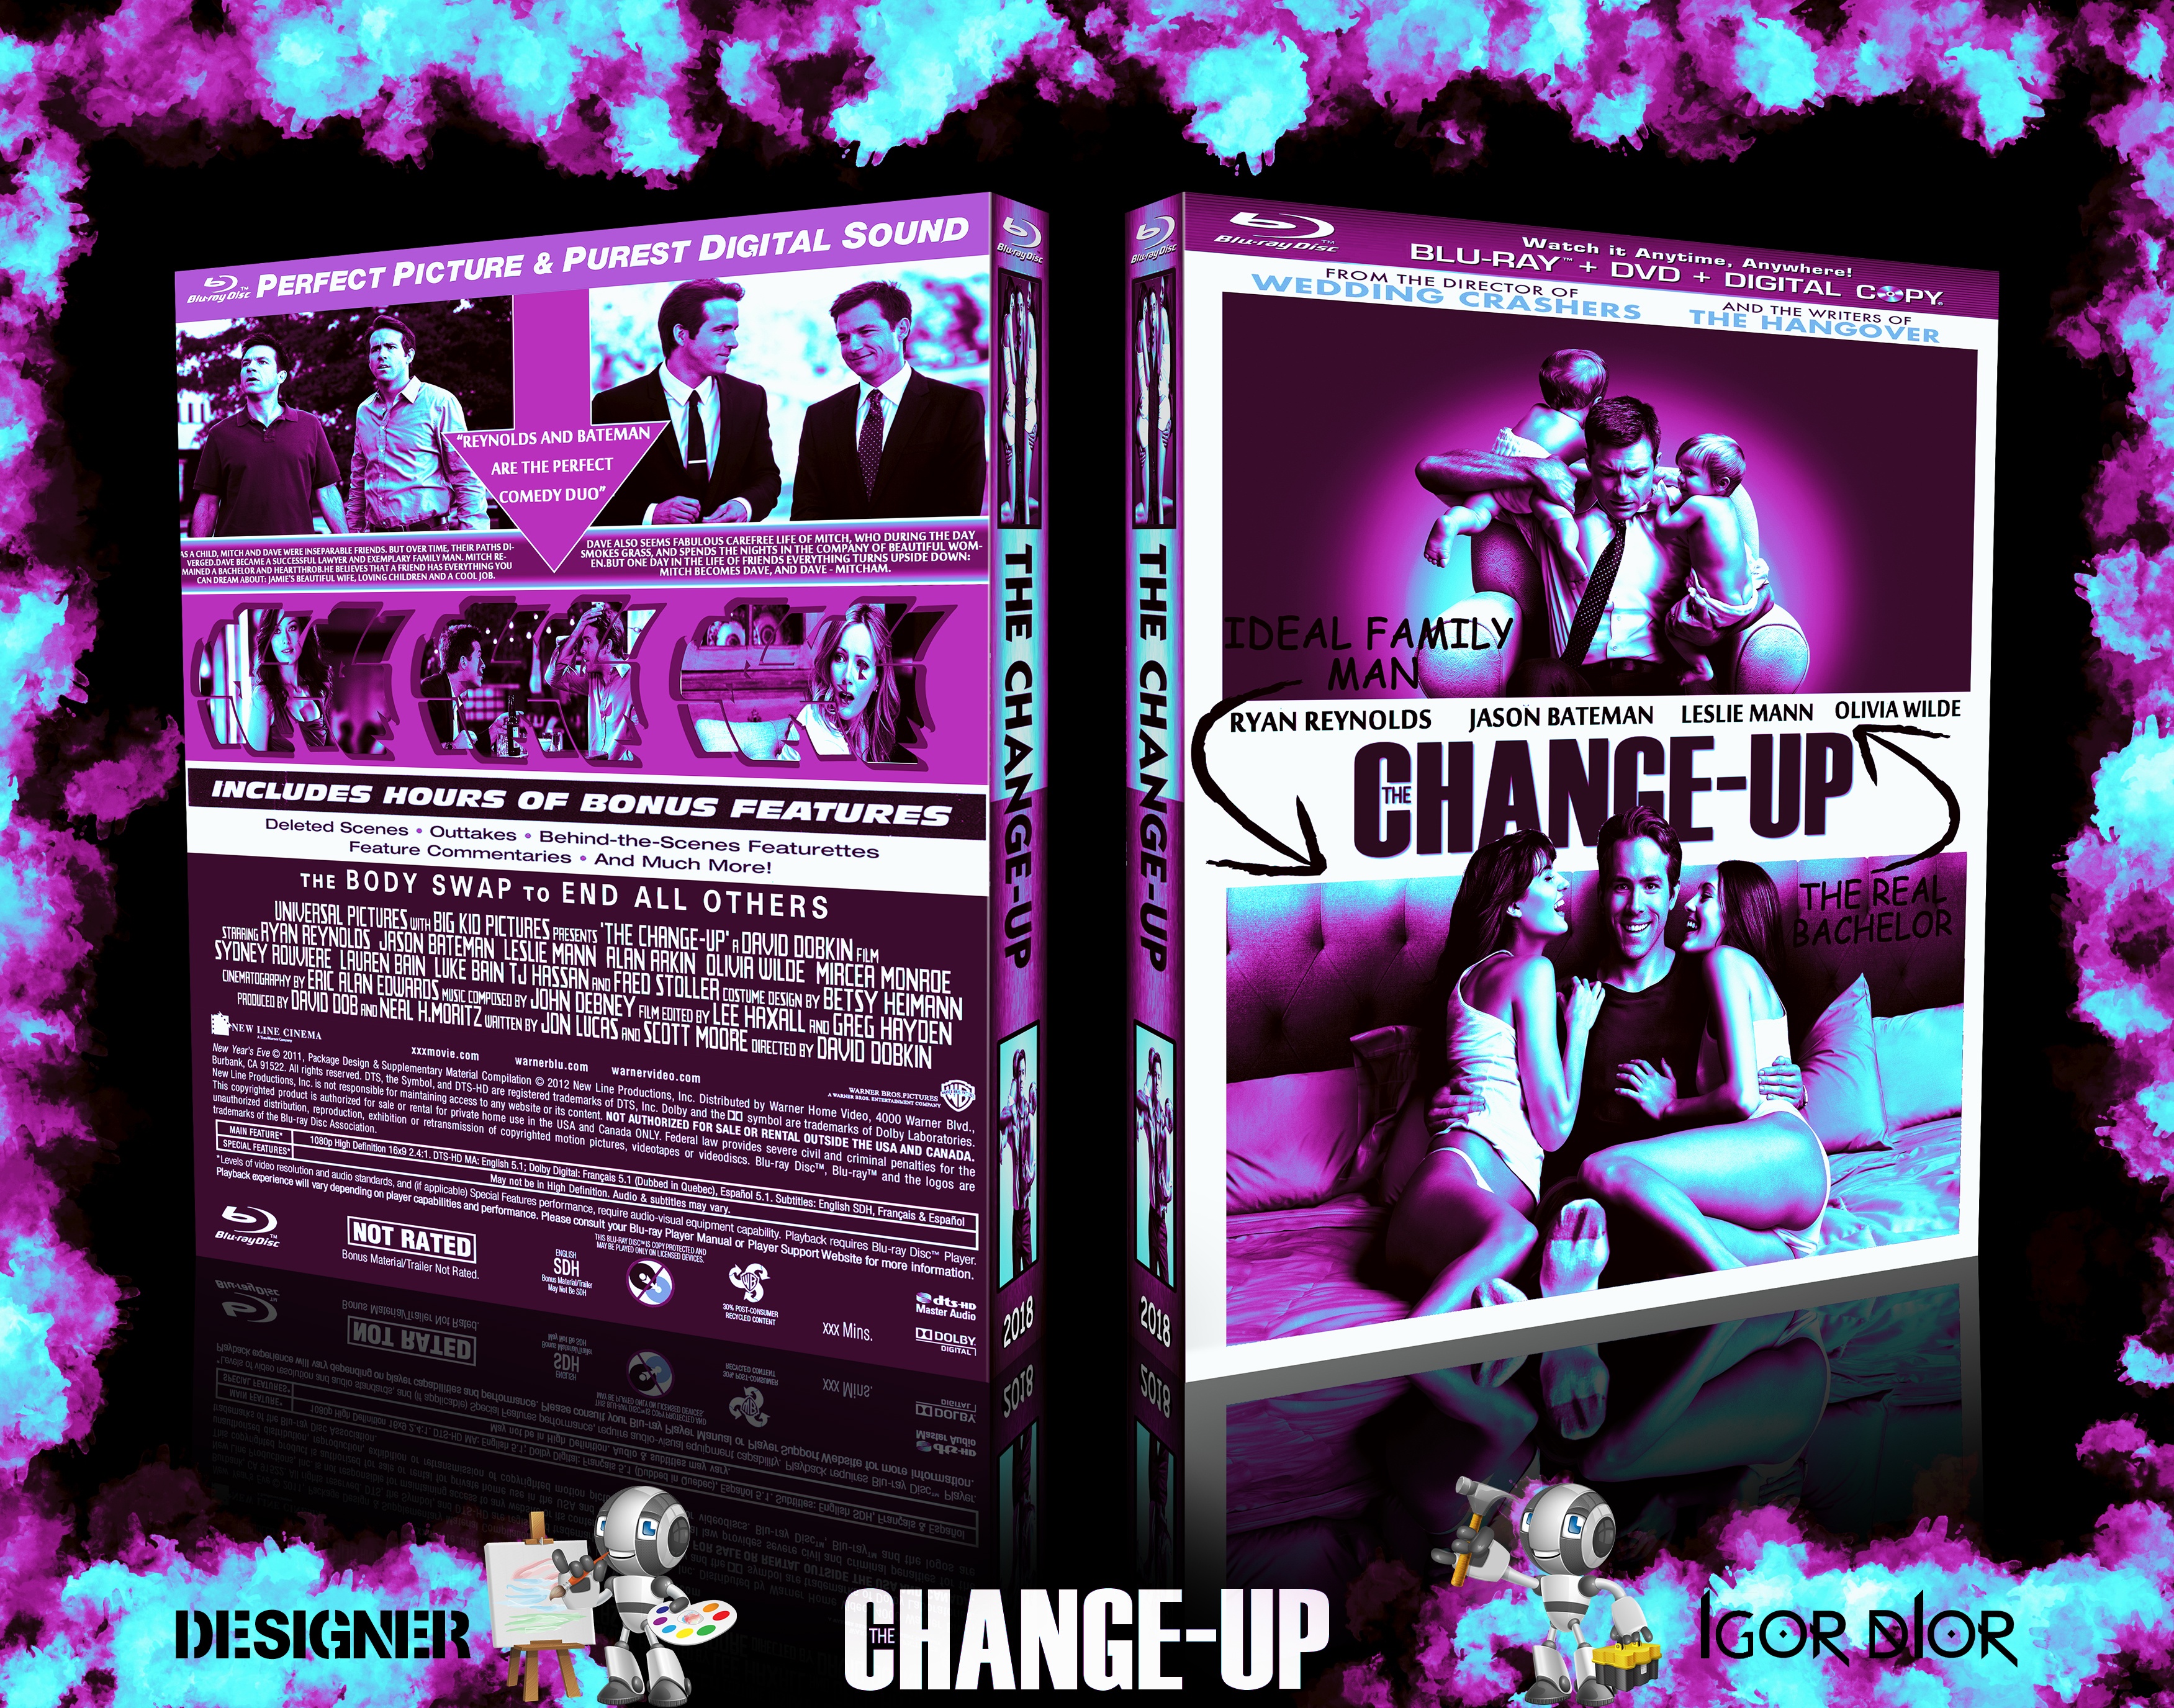 The Change-Up box cover